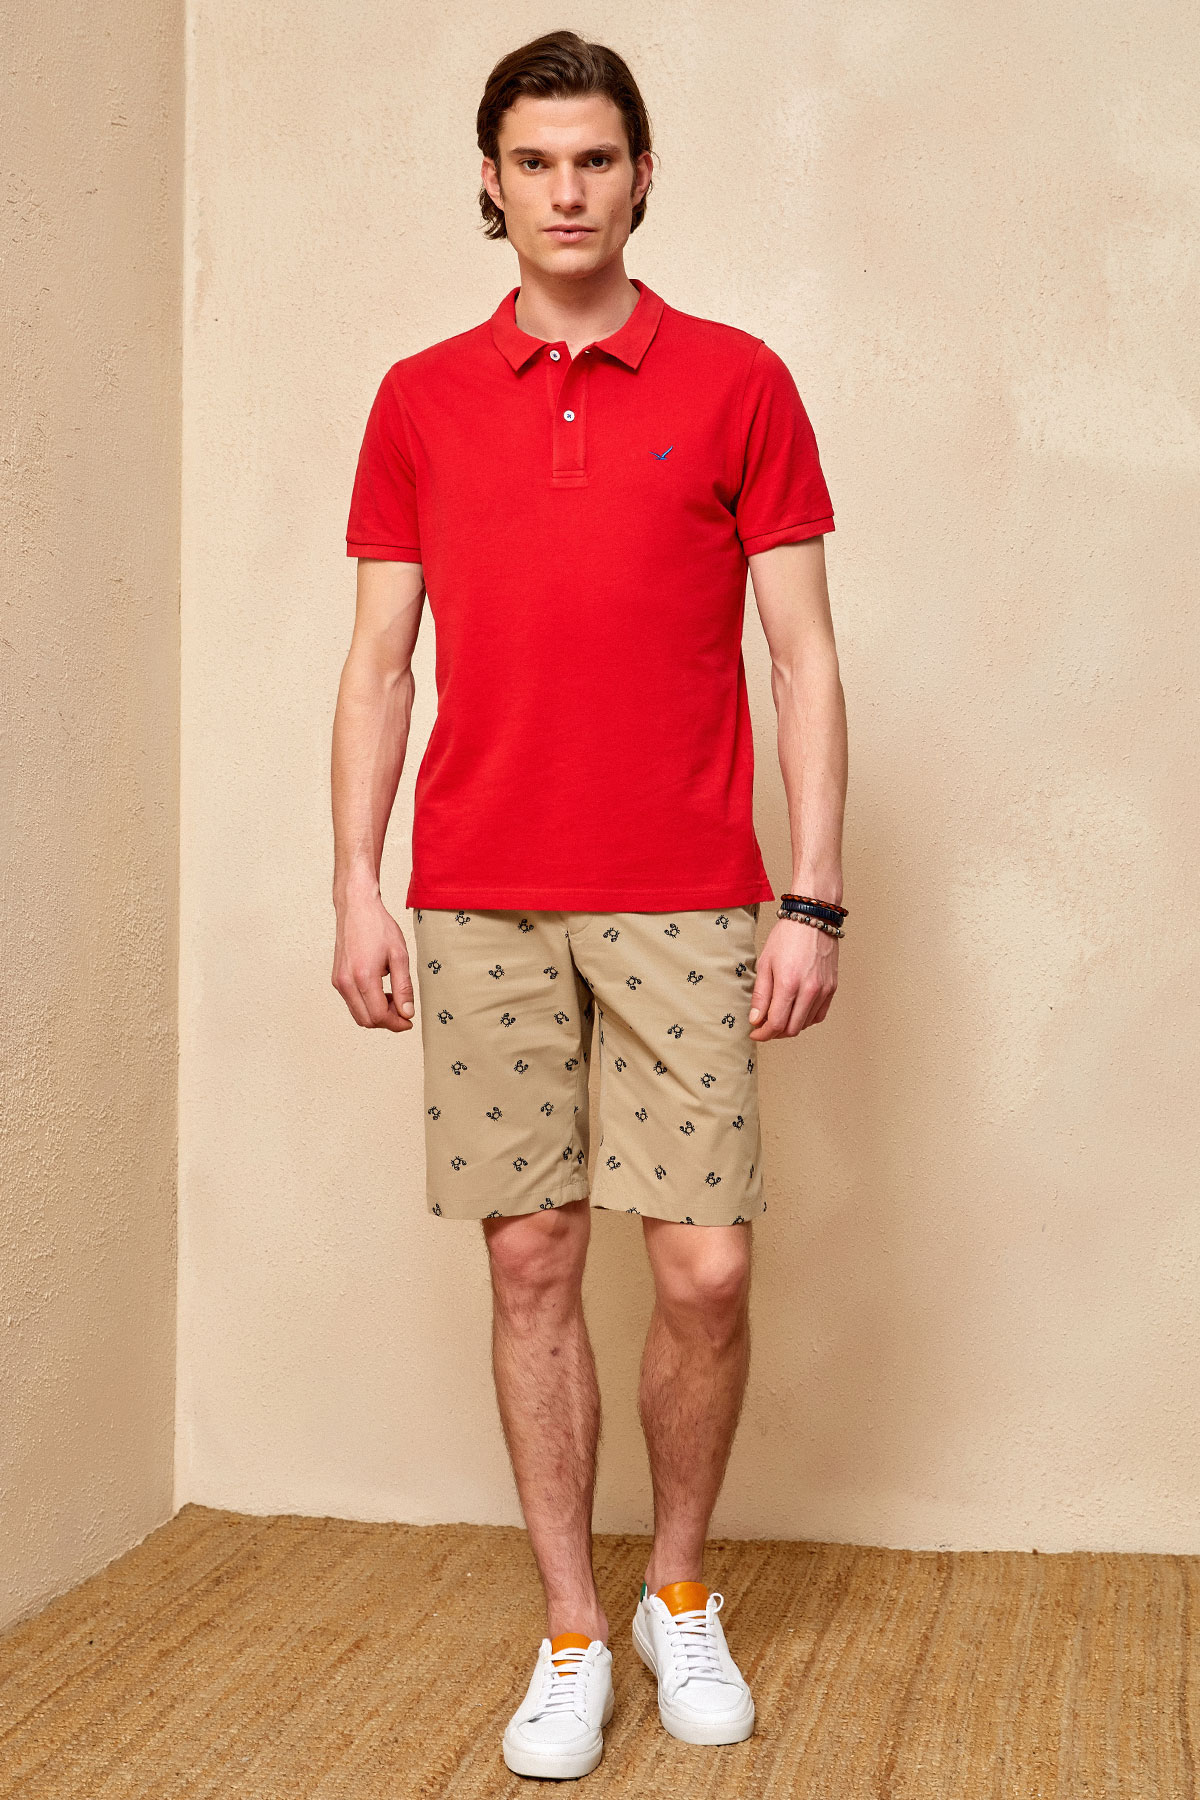 CAYMAN POLO - RED